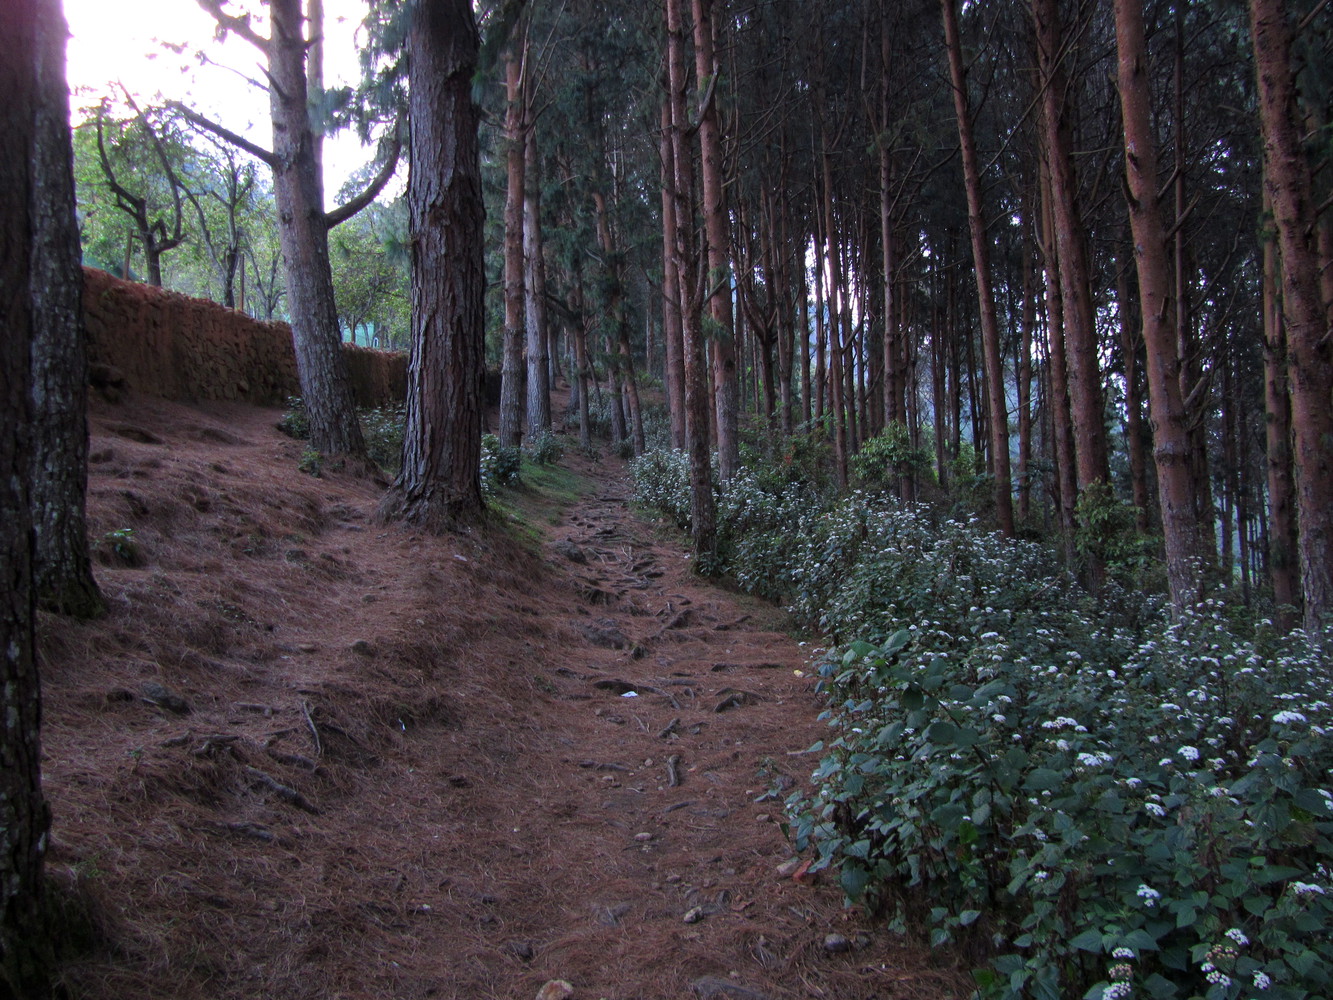 A mud path on a hill with a stone compound on the left side, and trees, plants, and flowers along the slope of the hill on the right side